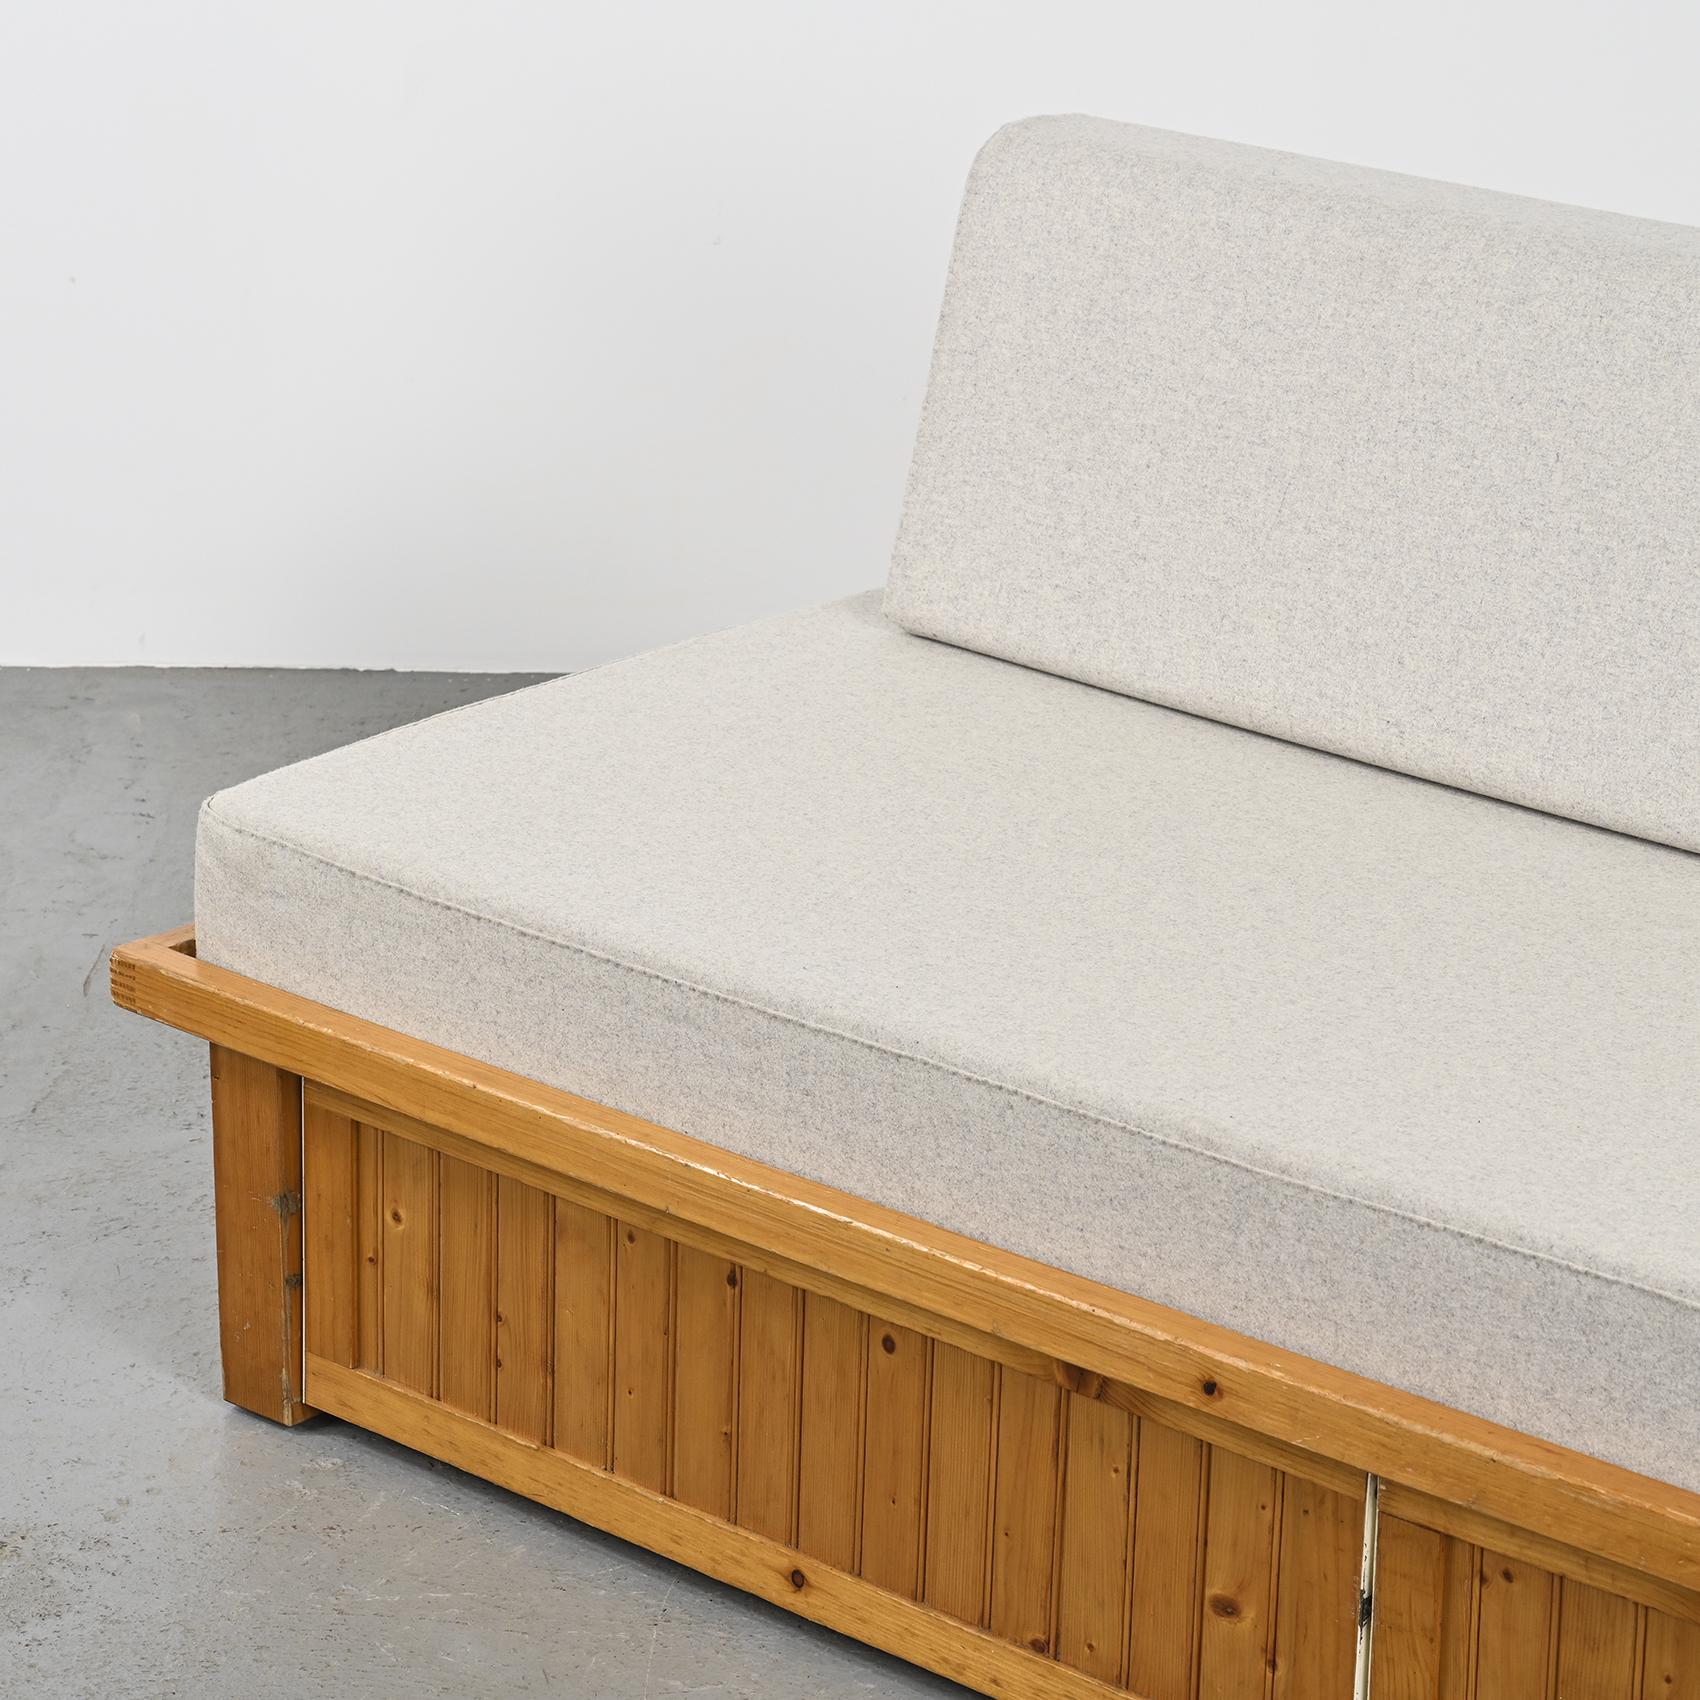 Pine Charlotte Perriand :  Les Arcs Daybed, circa 1970